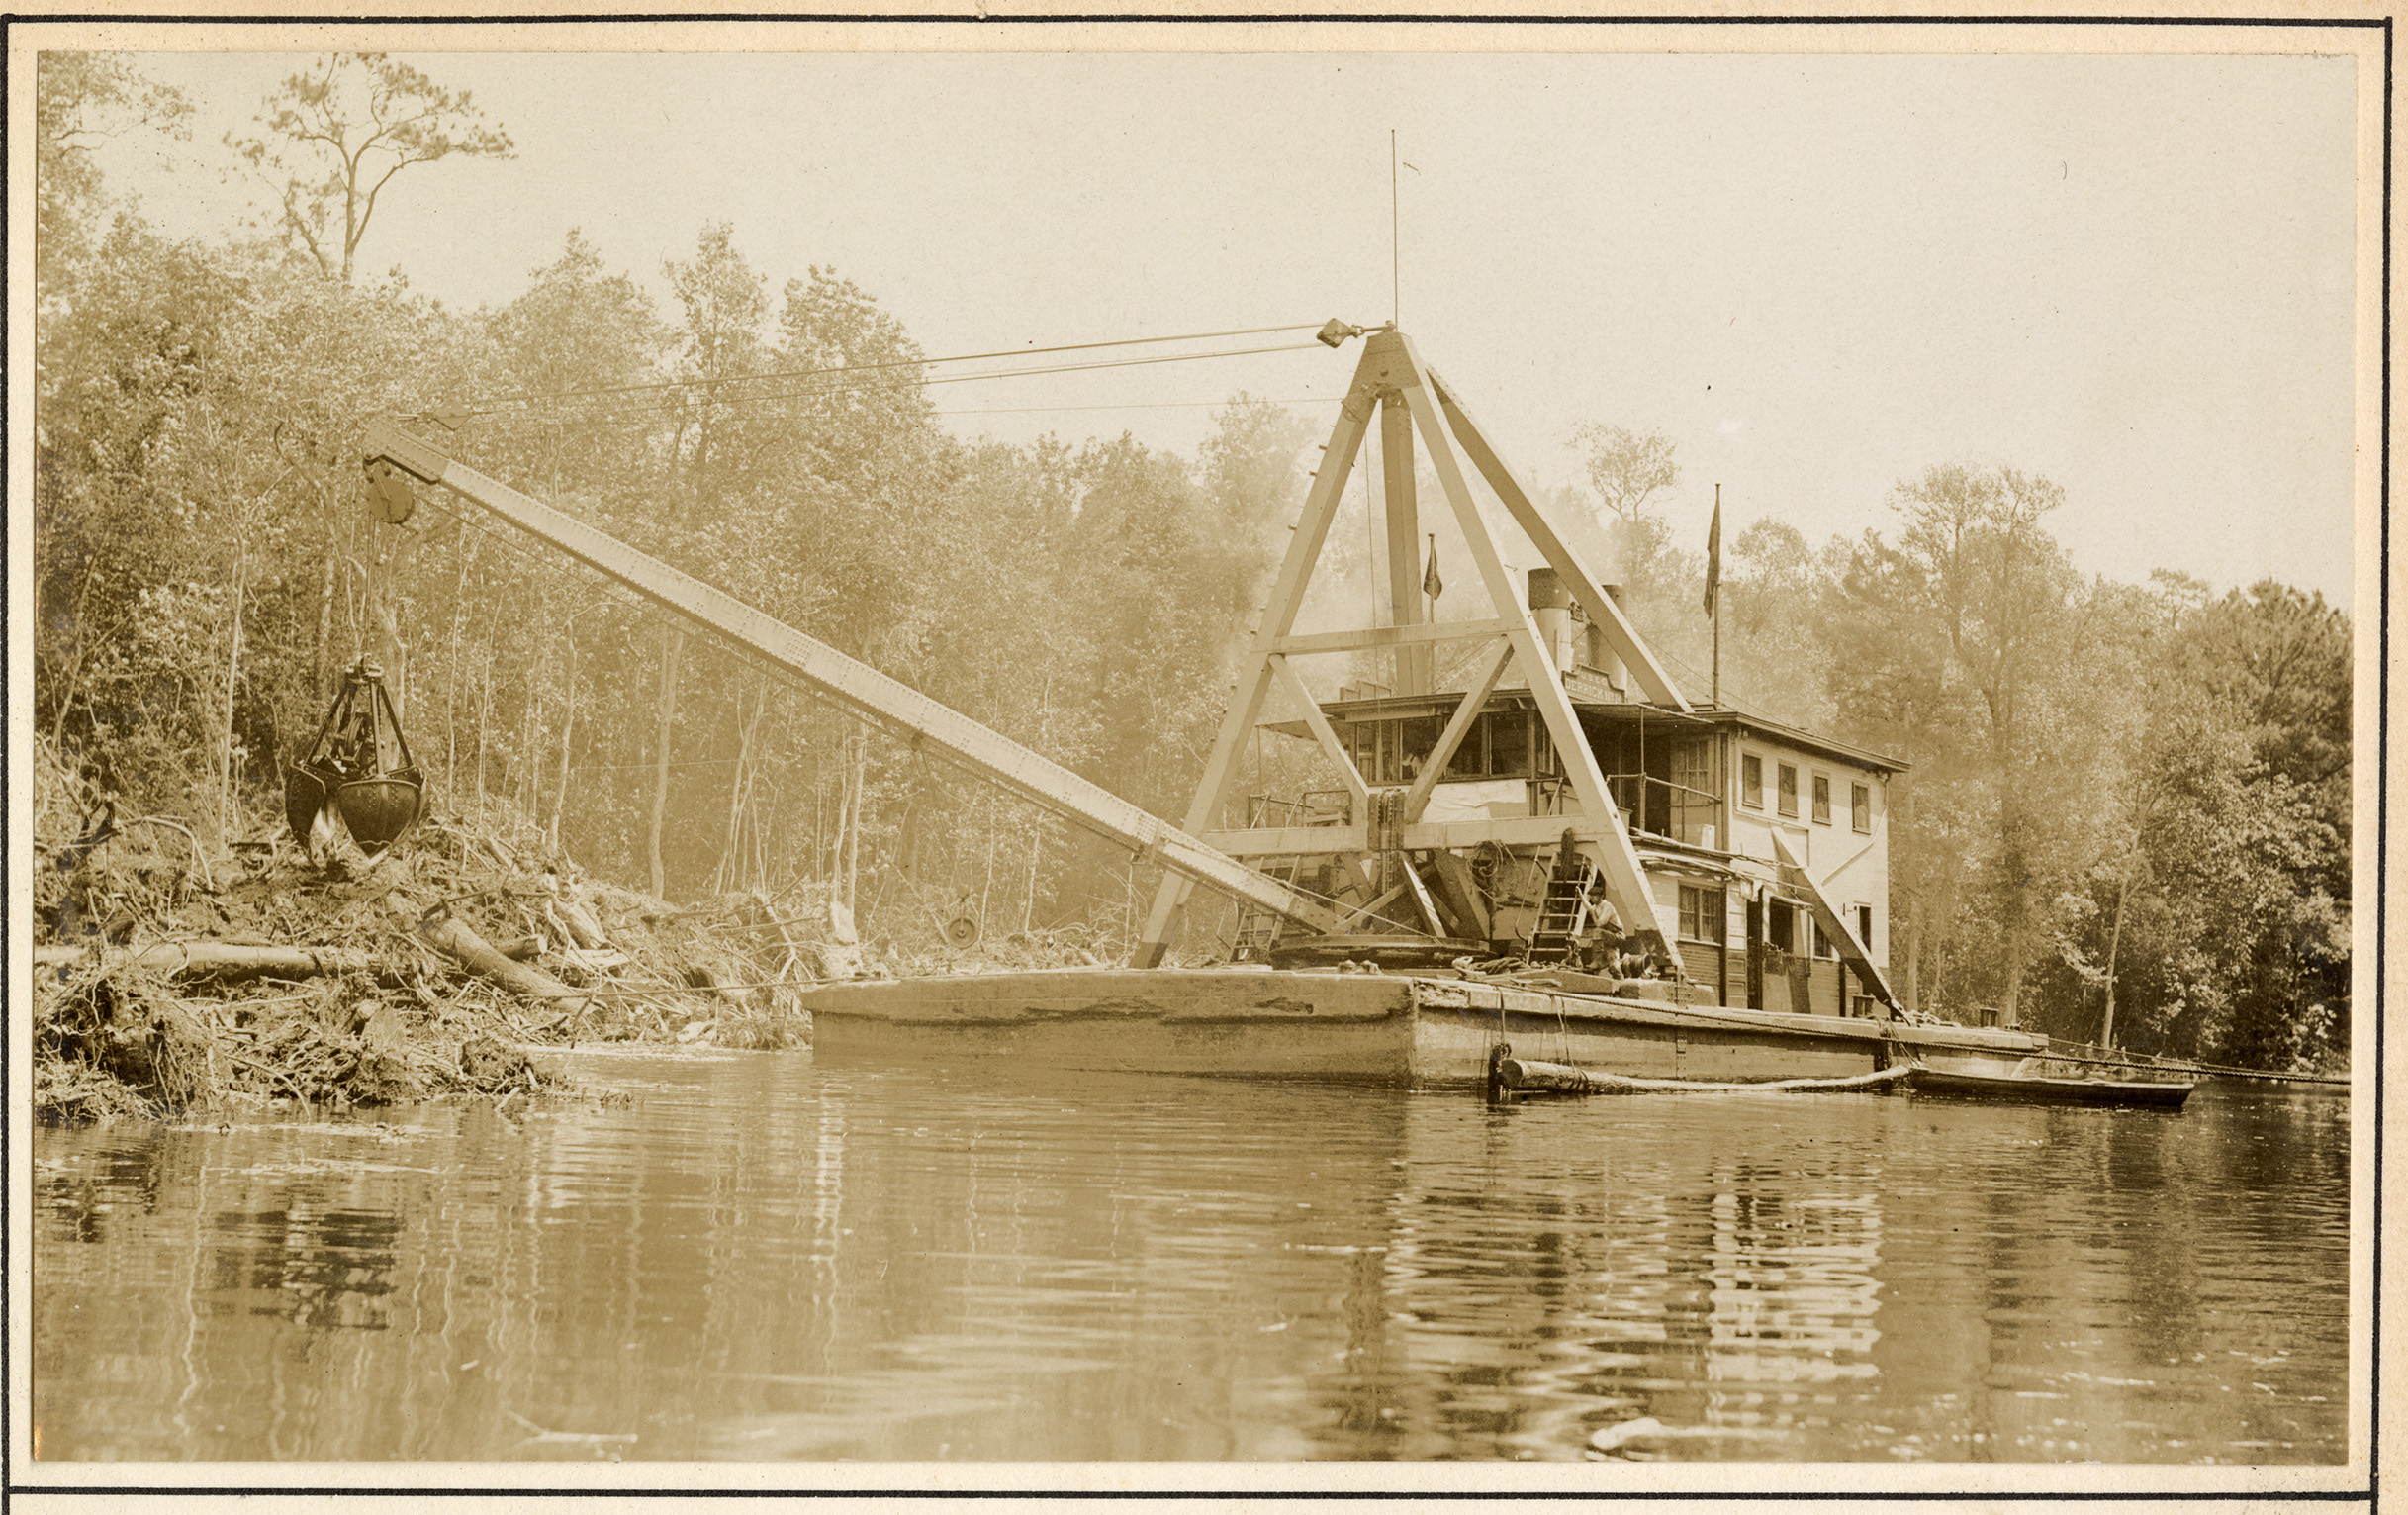 Small dredge in water surrounded by trees